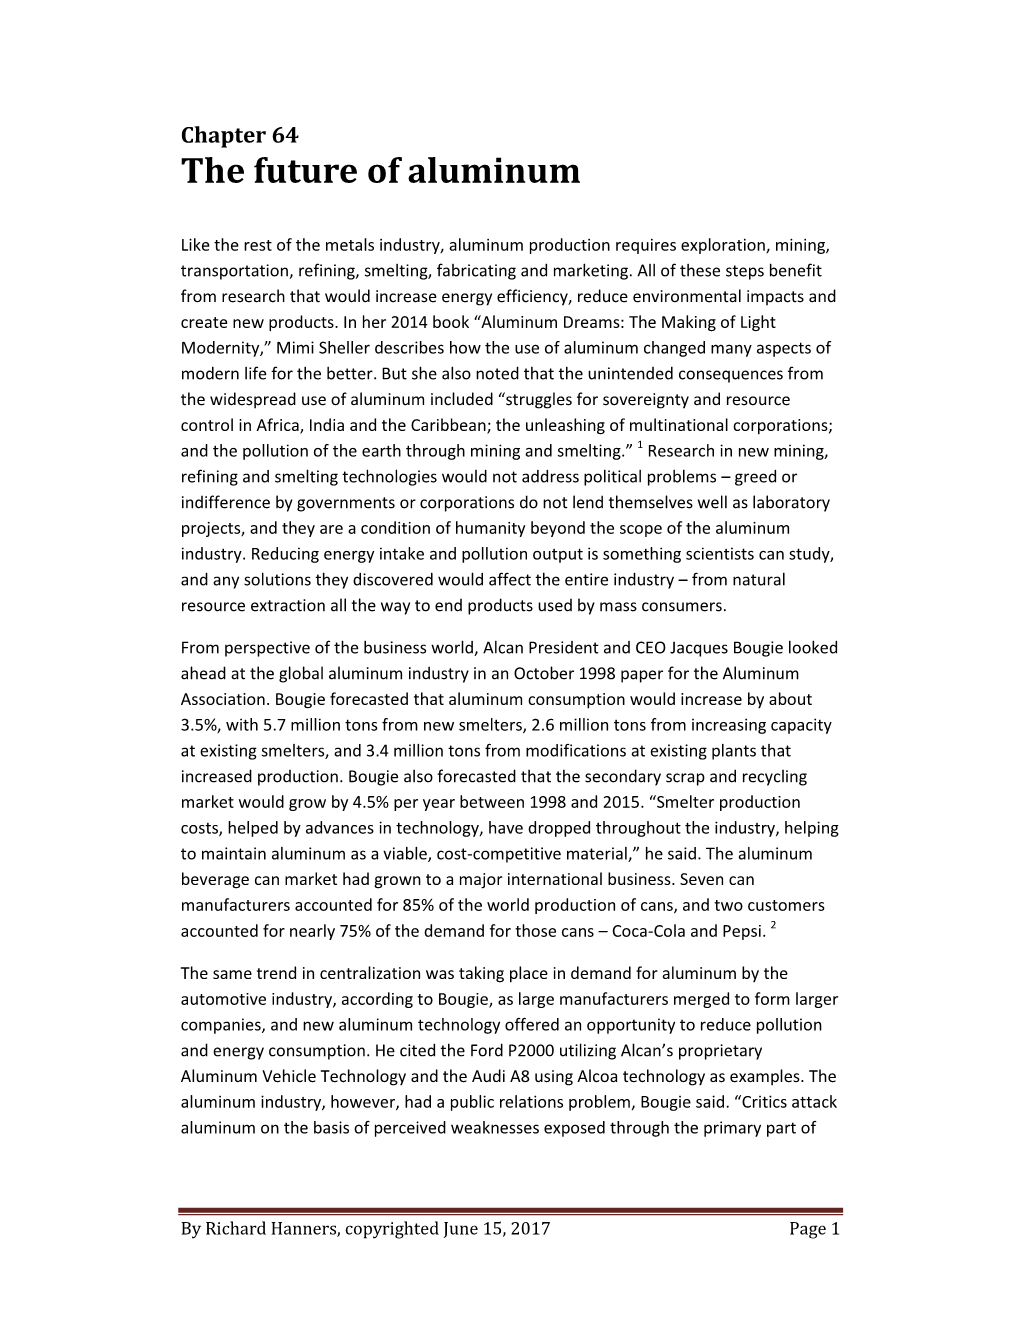 Chapter 64 – the Future of Aluminum